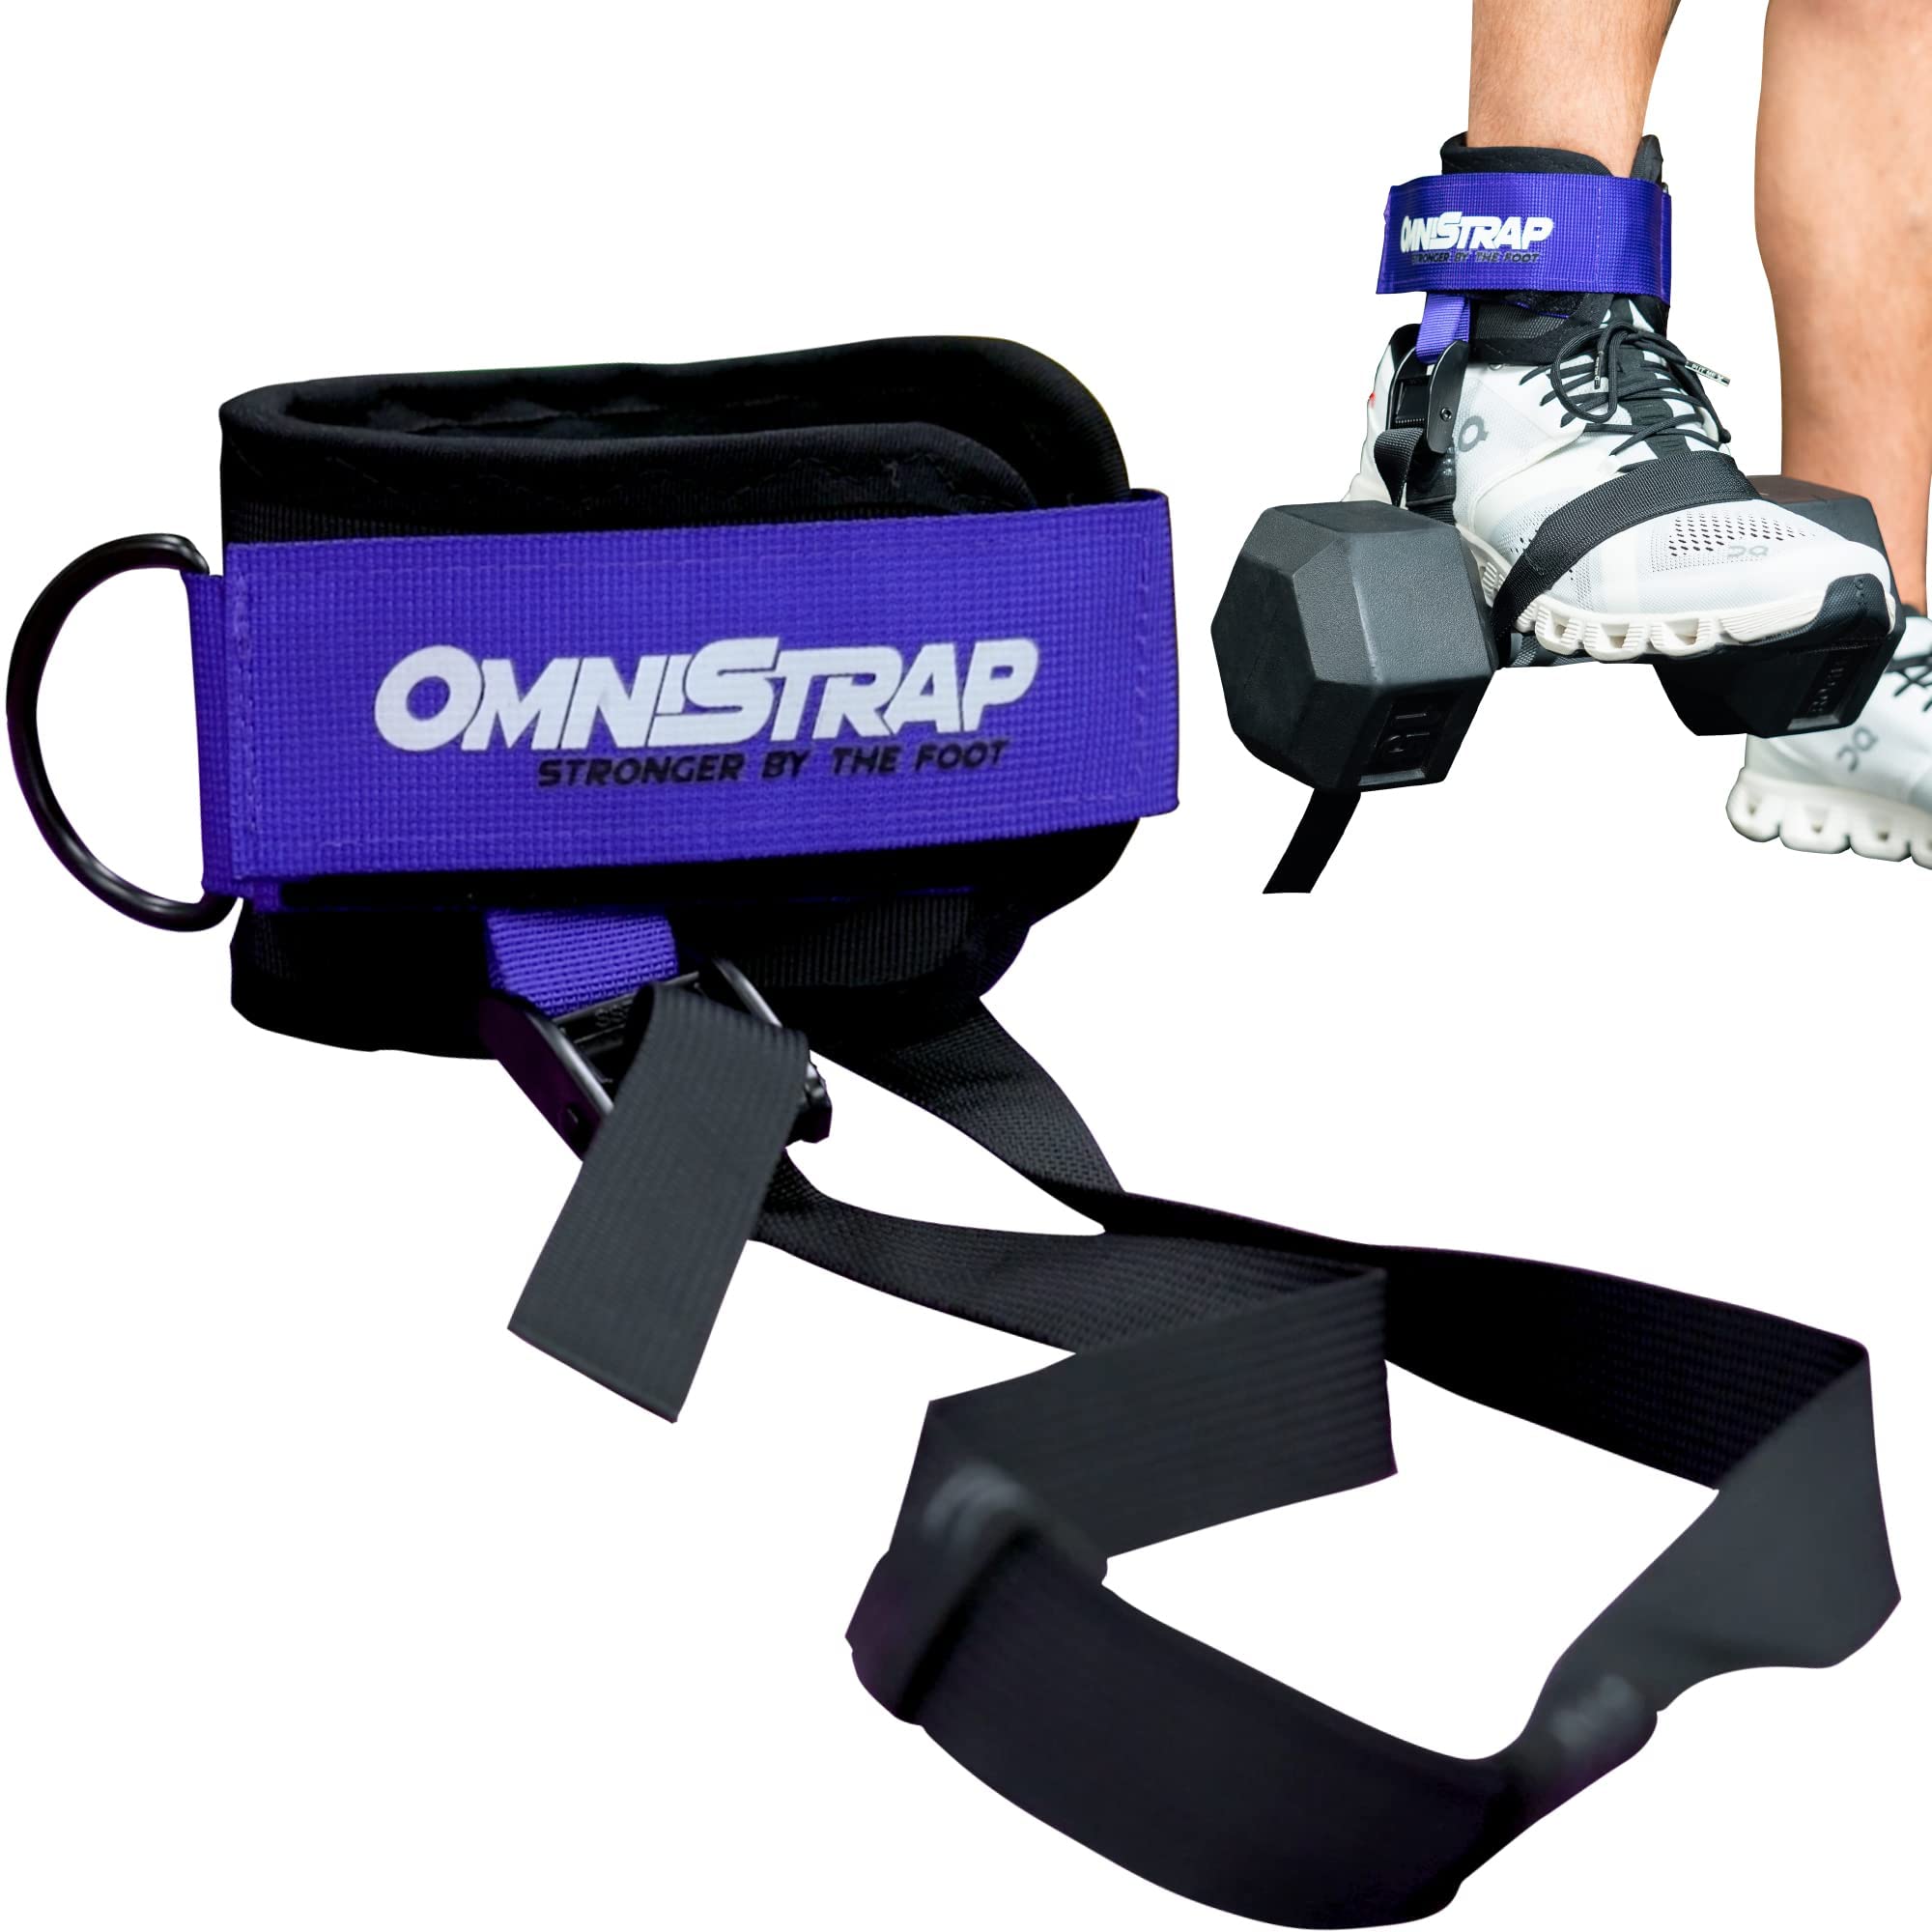 OMNISTRAP Adjustable Dumbbell Ankle Strap,Weightlifting Shoe Attachment, Great For Many Exercises including: Glute Kickbacks, Side Kicks,Strength Training for Men and Women,10 Second Setup